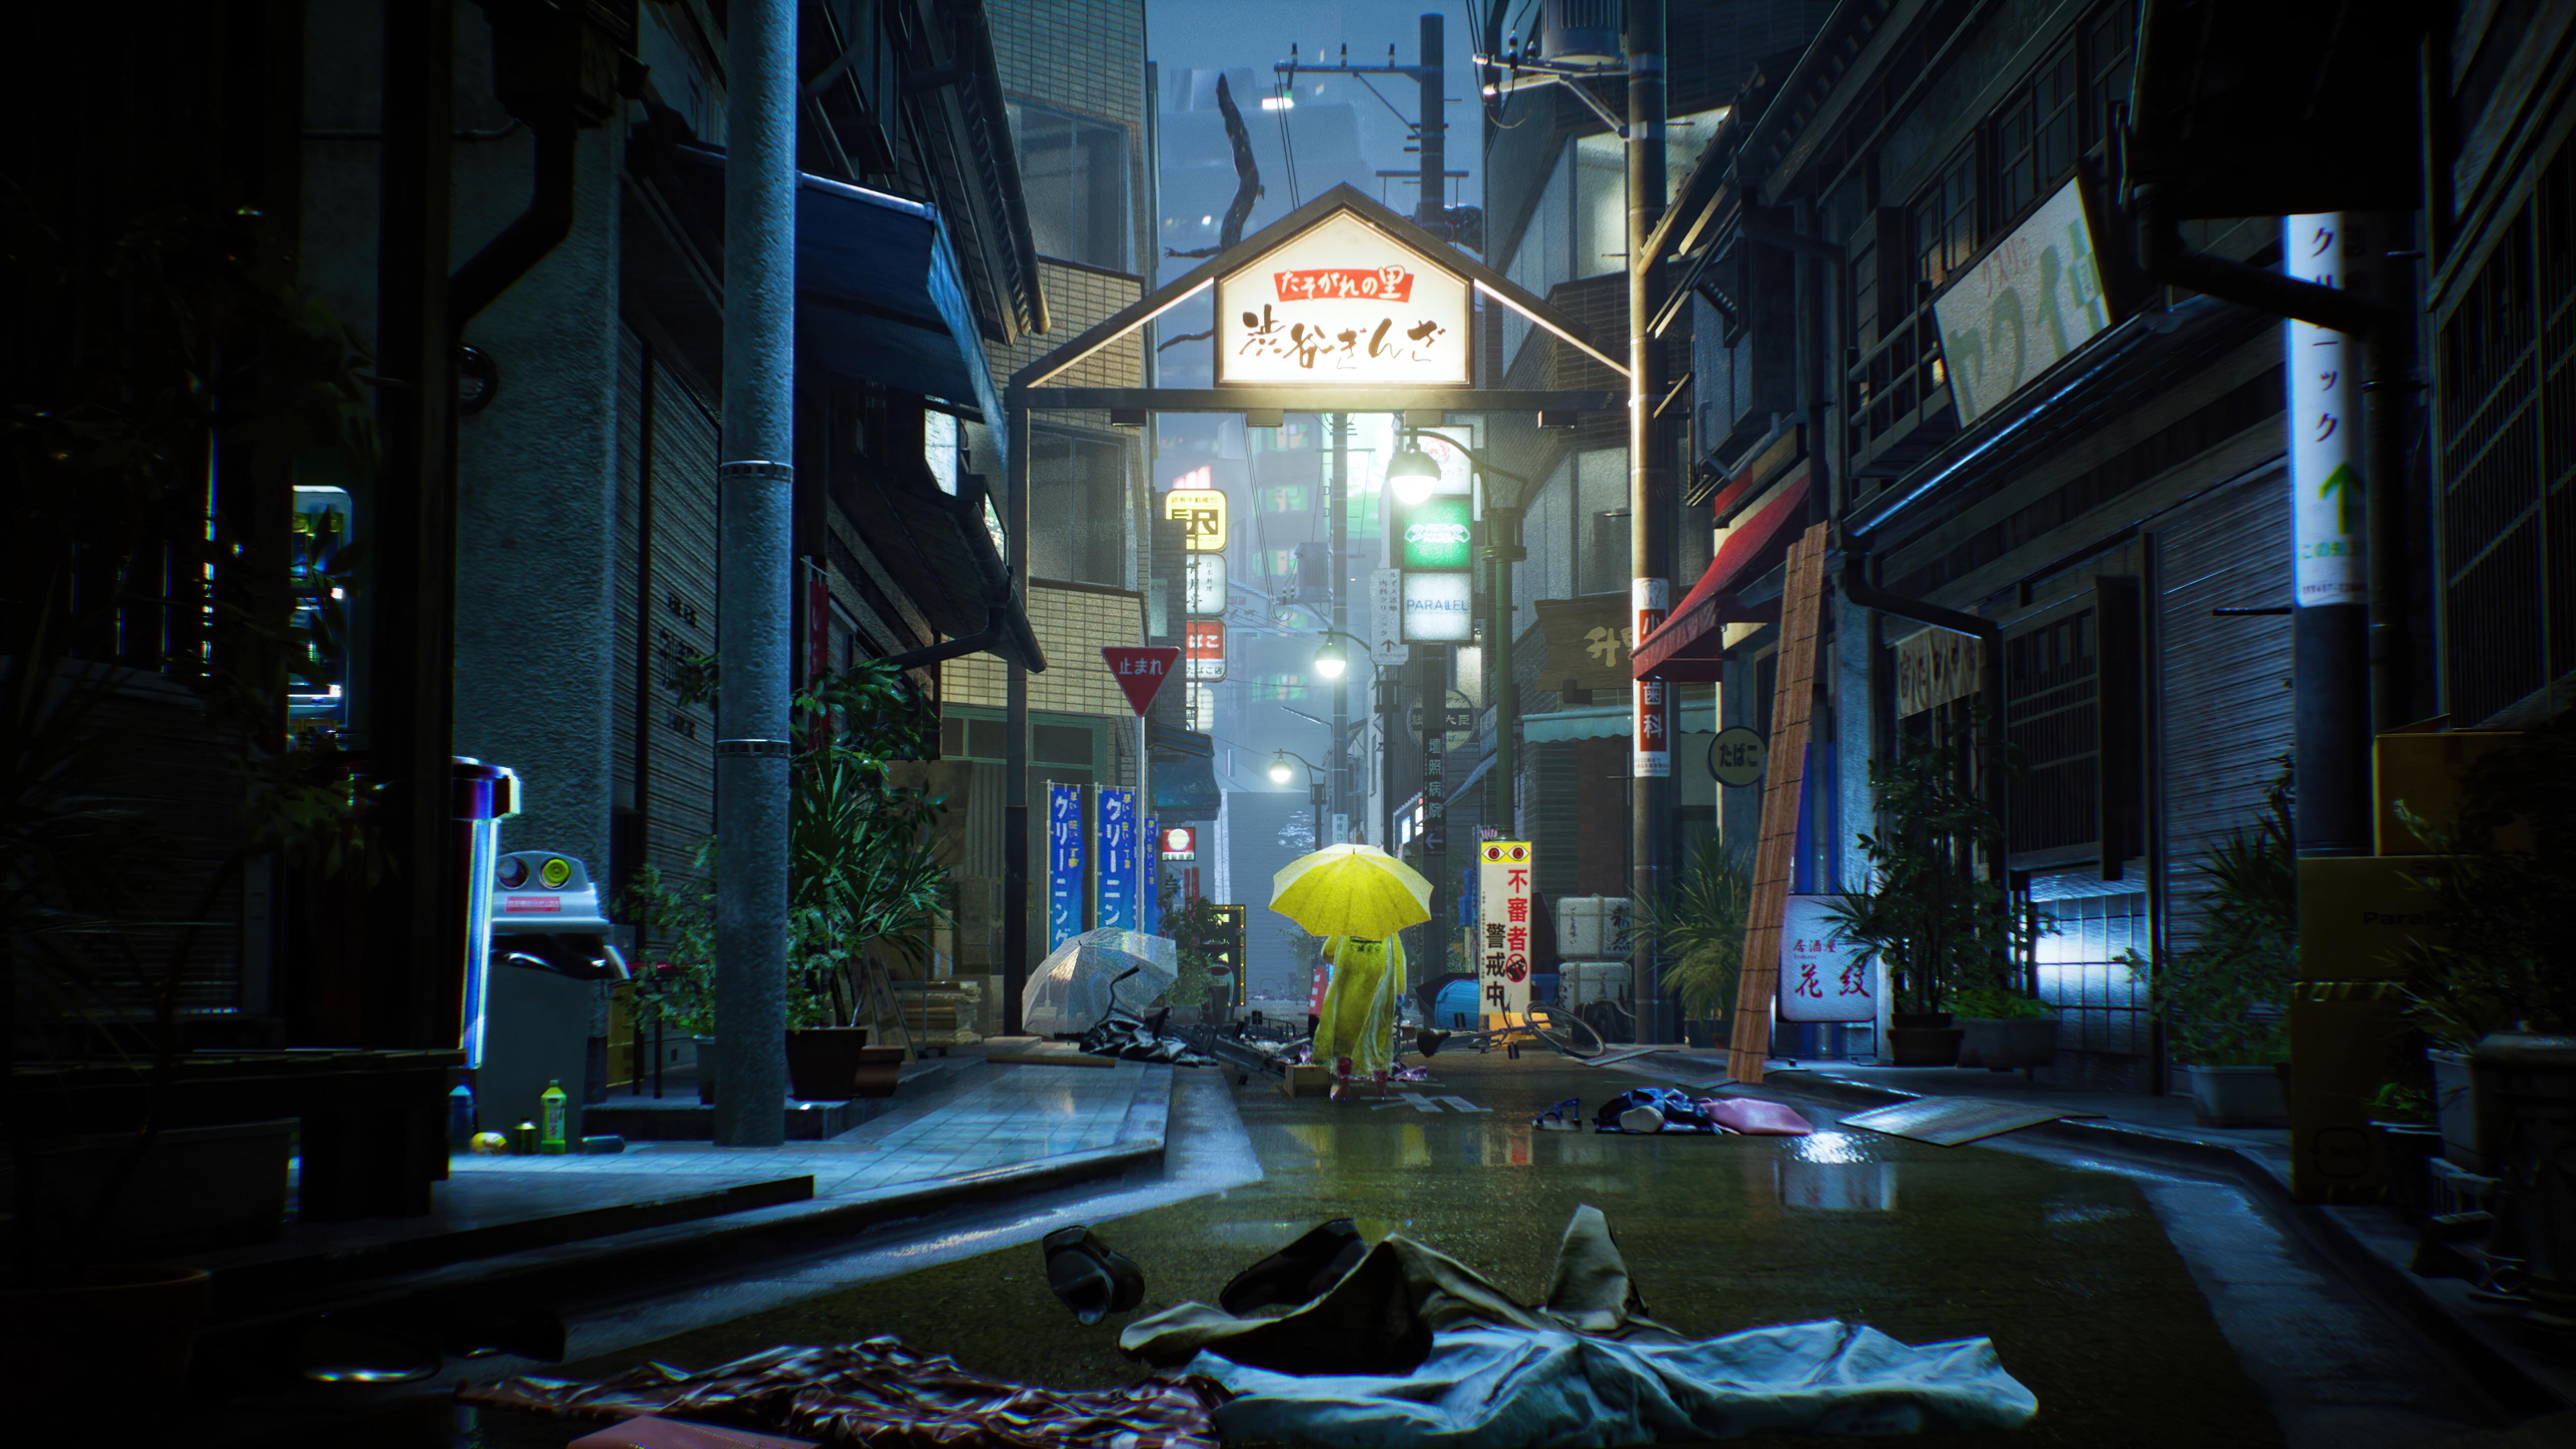 A person walking down an alley with trash on the ground - Tokyo